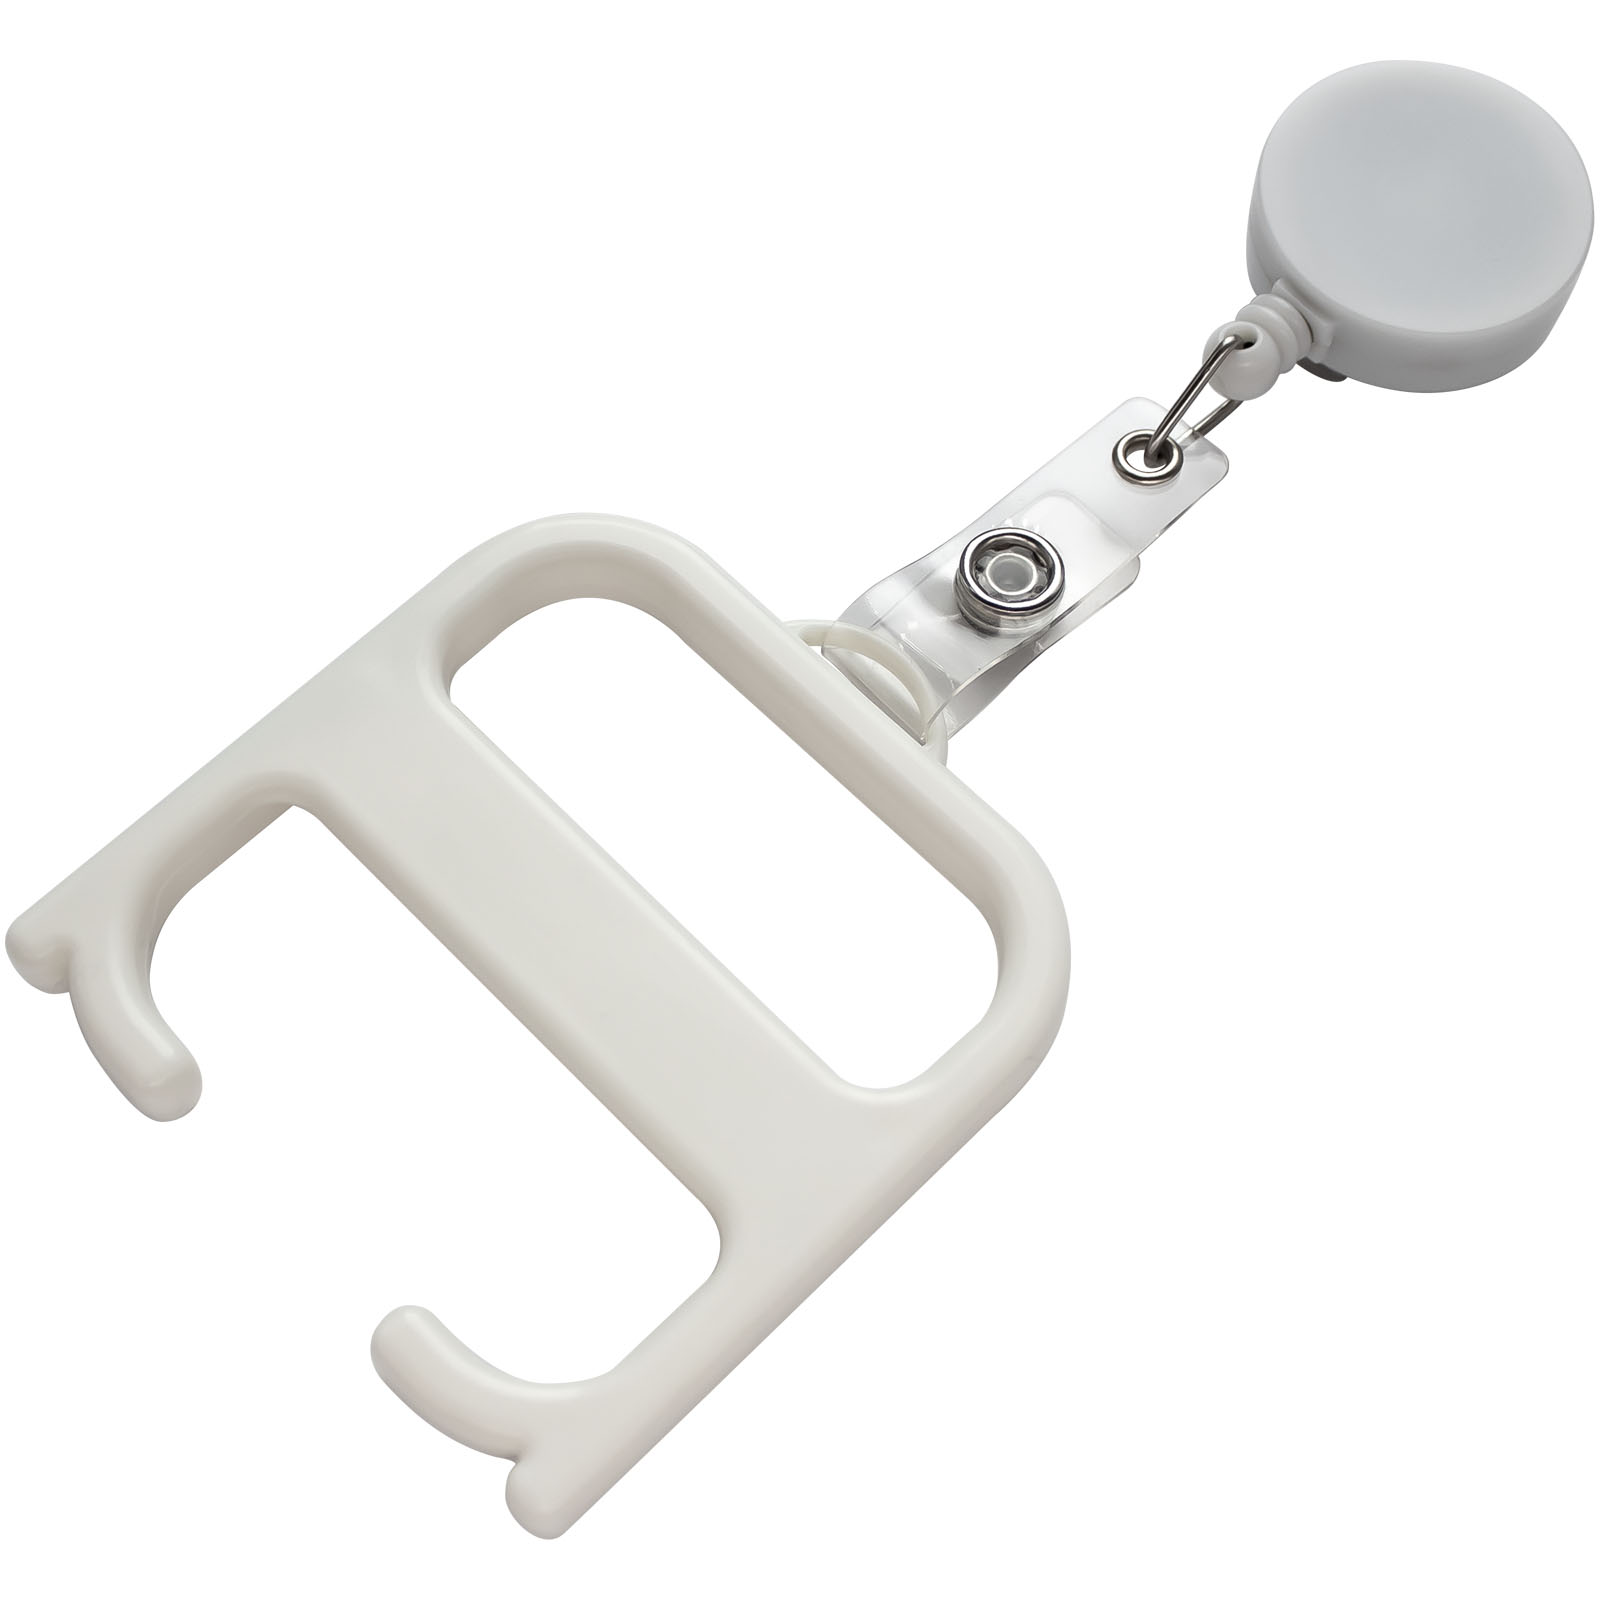 Antimicrobial No-Touch Keychain Tool - Ripon